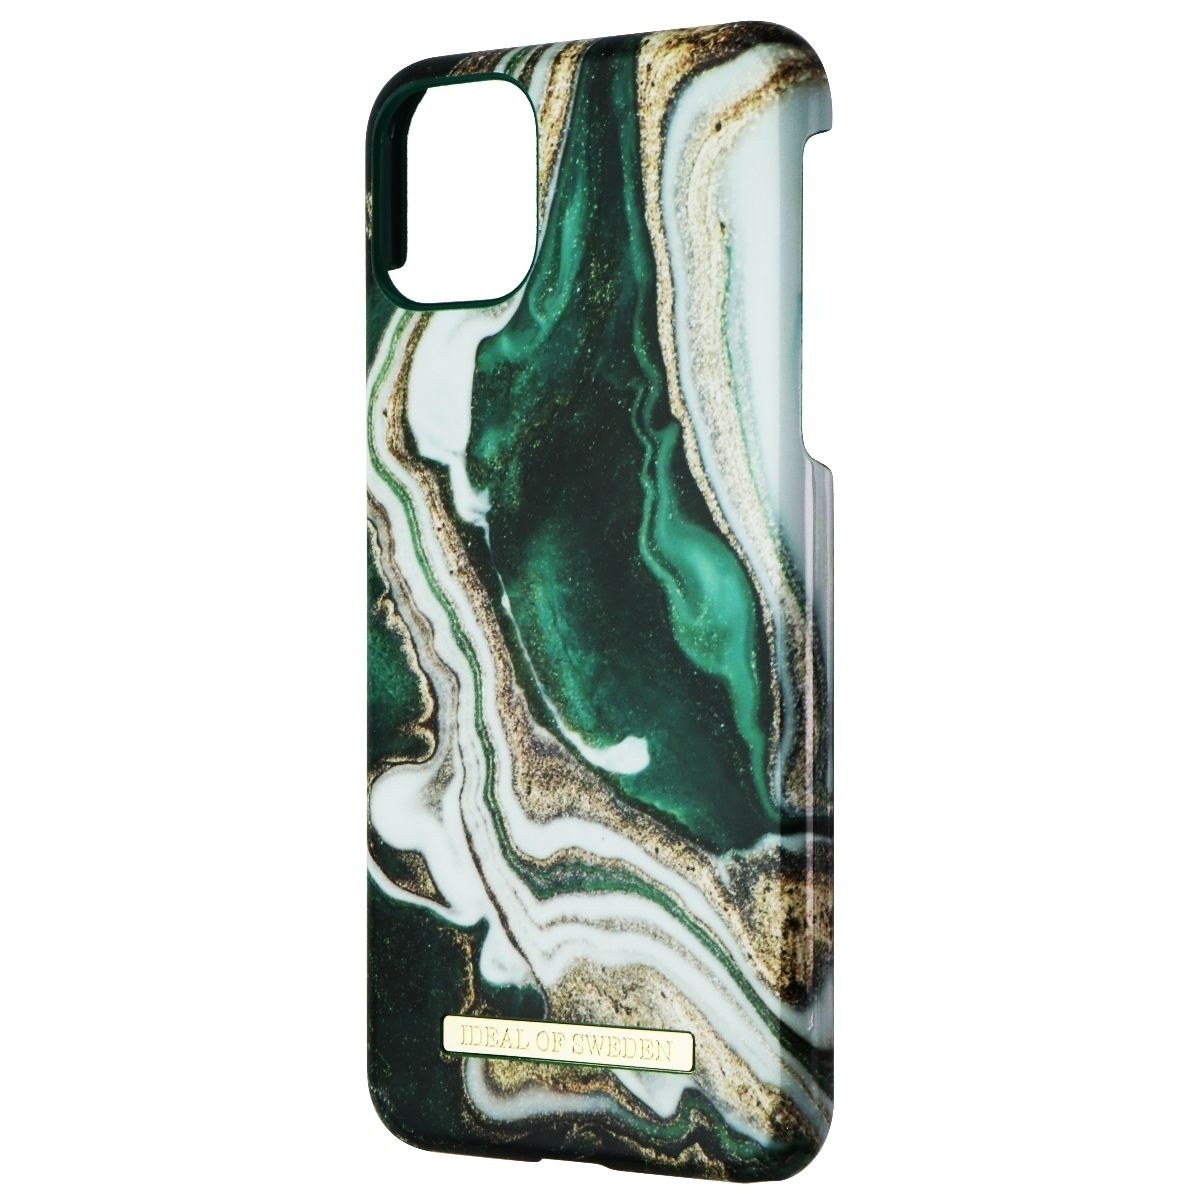 IDeal Of Sweden Hard Case For IPhone 11 Pro Max / Xs Max - Golden Jade Marble